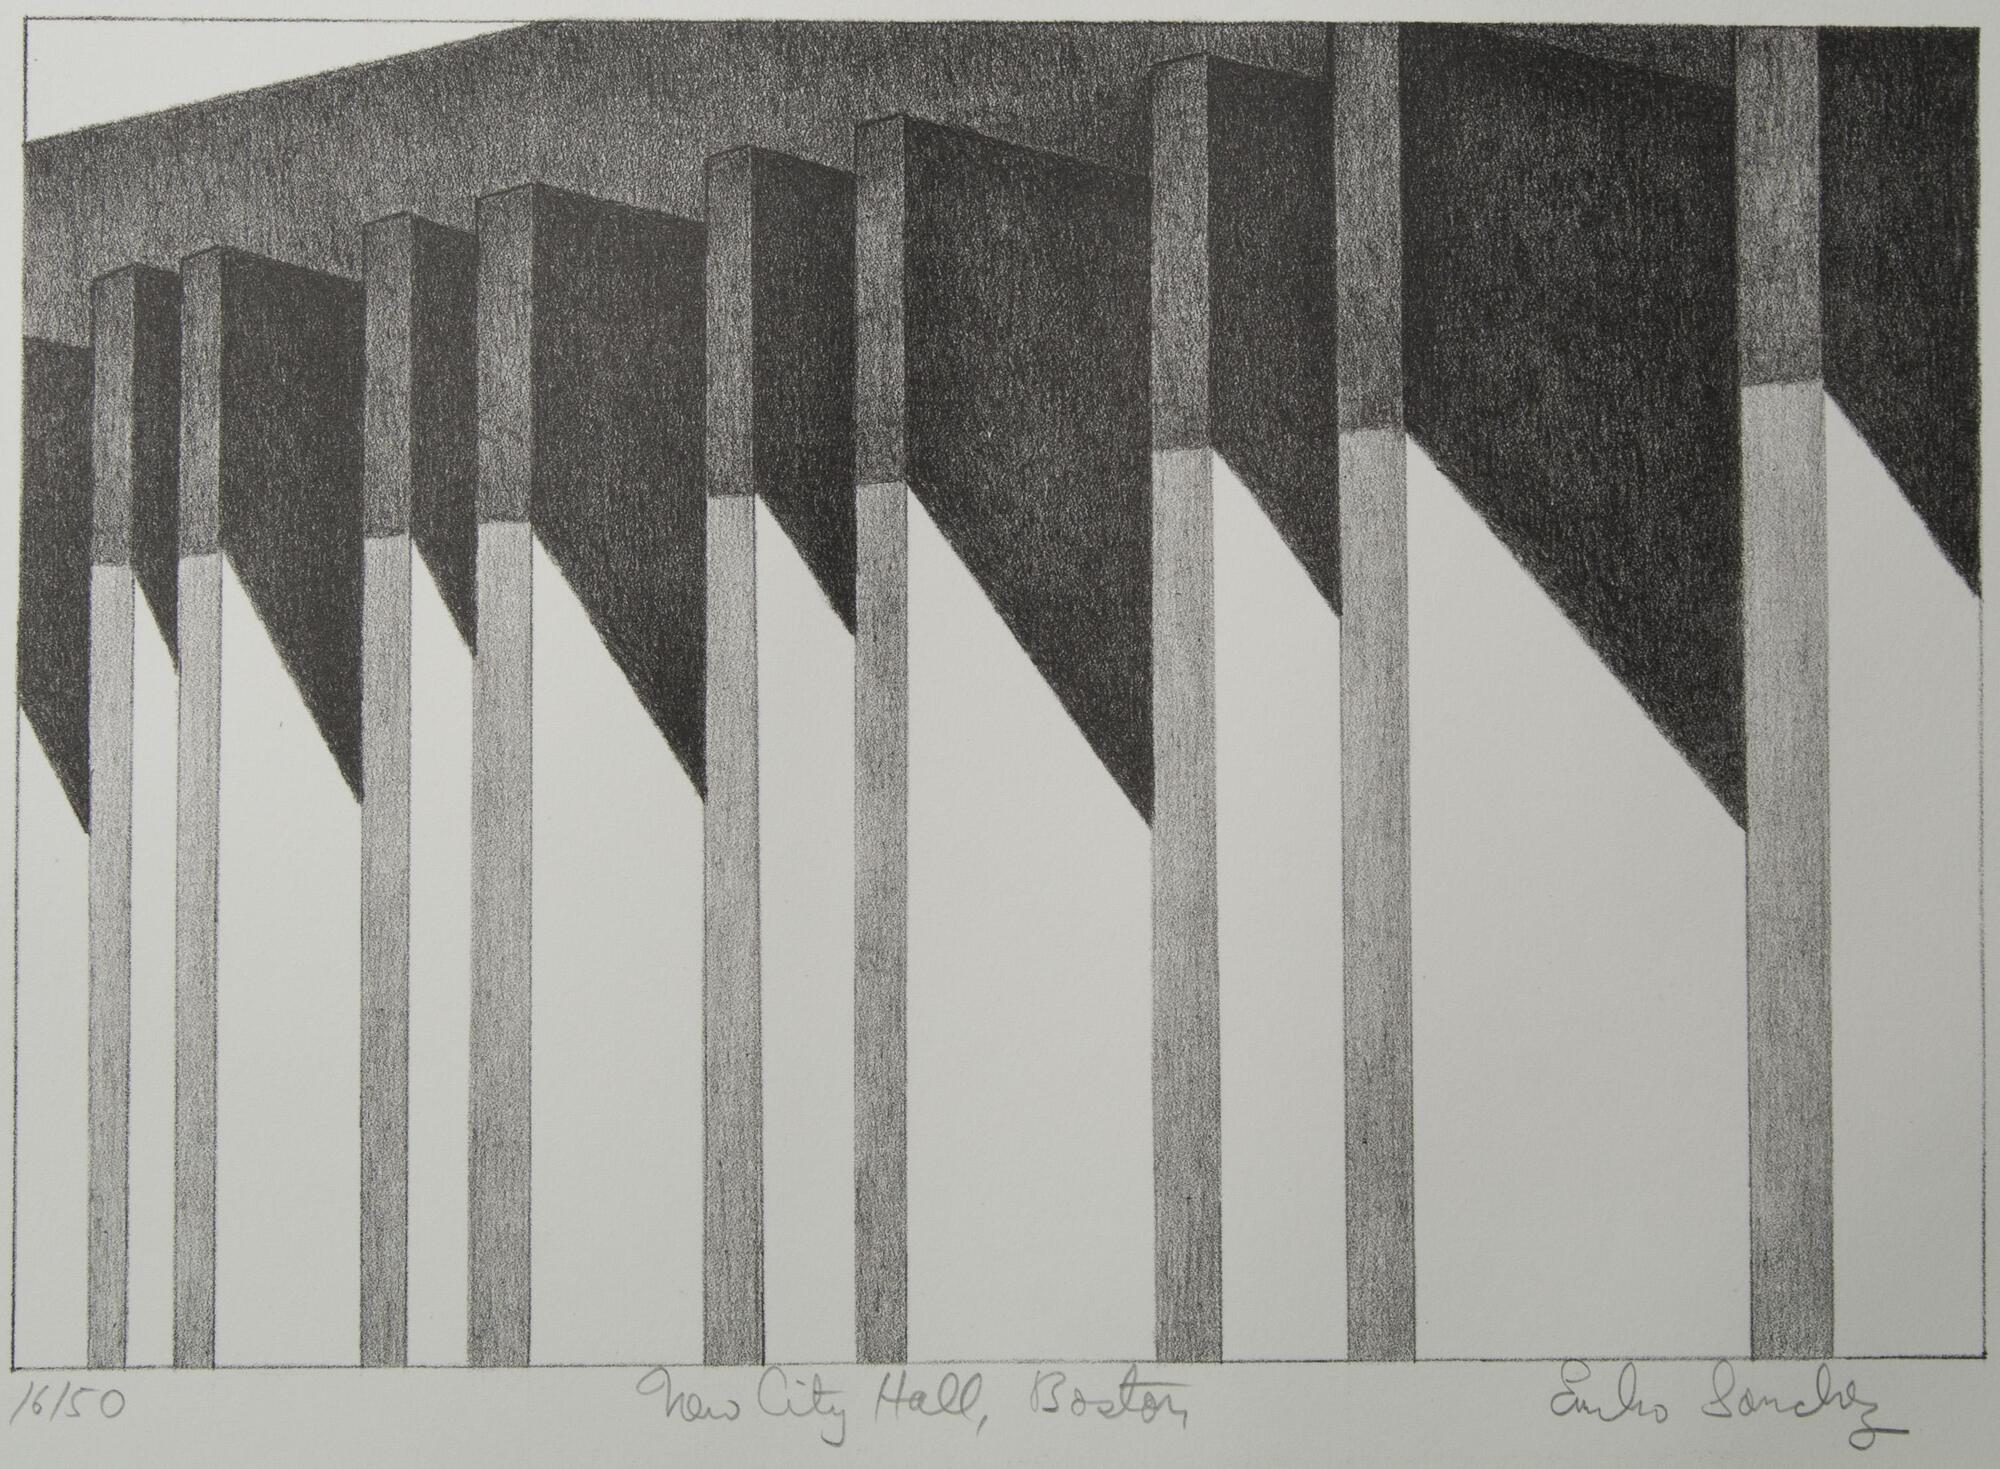 A black and white print of the exterior columns of Boston City Hall.